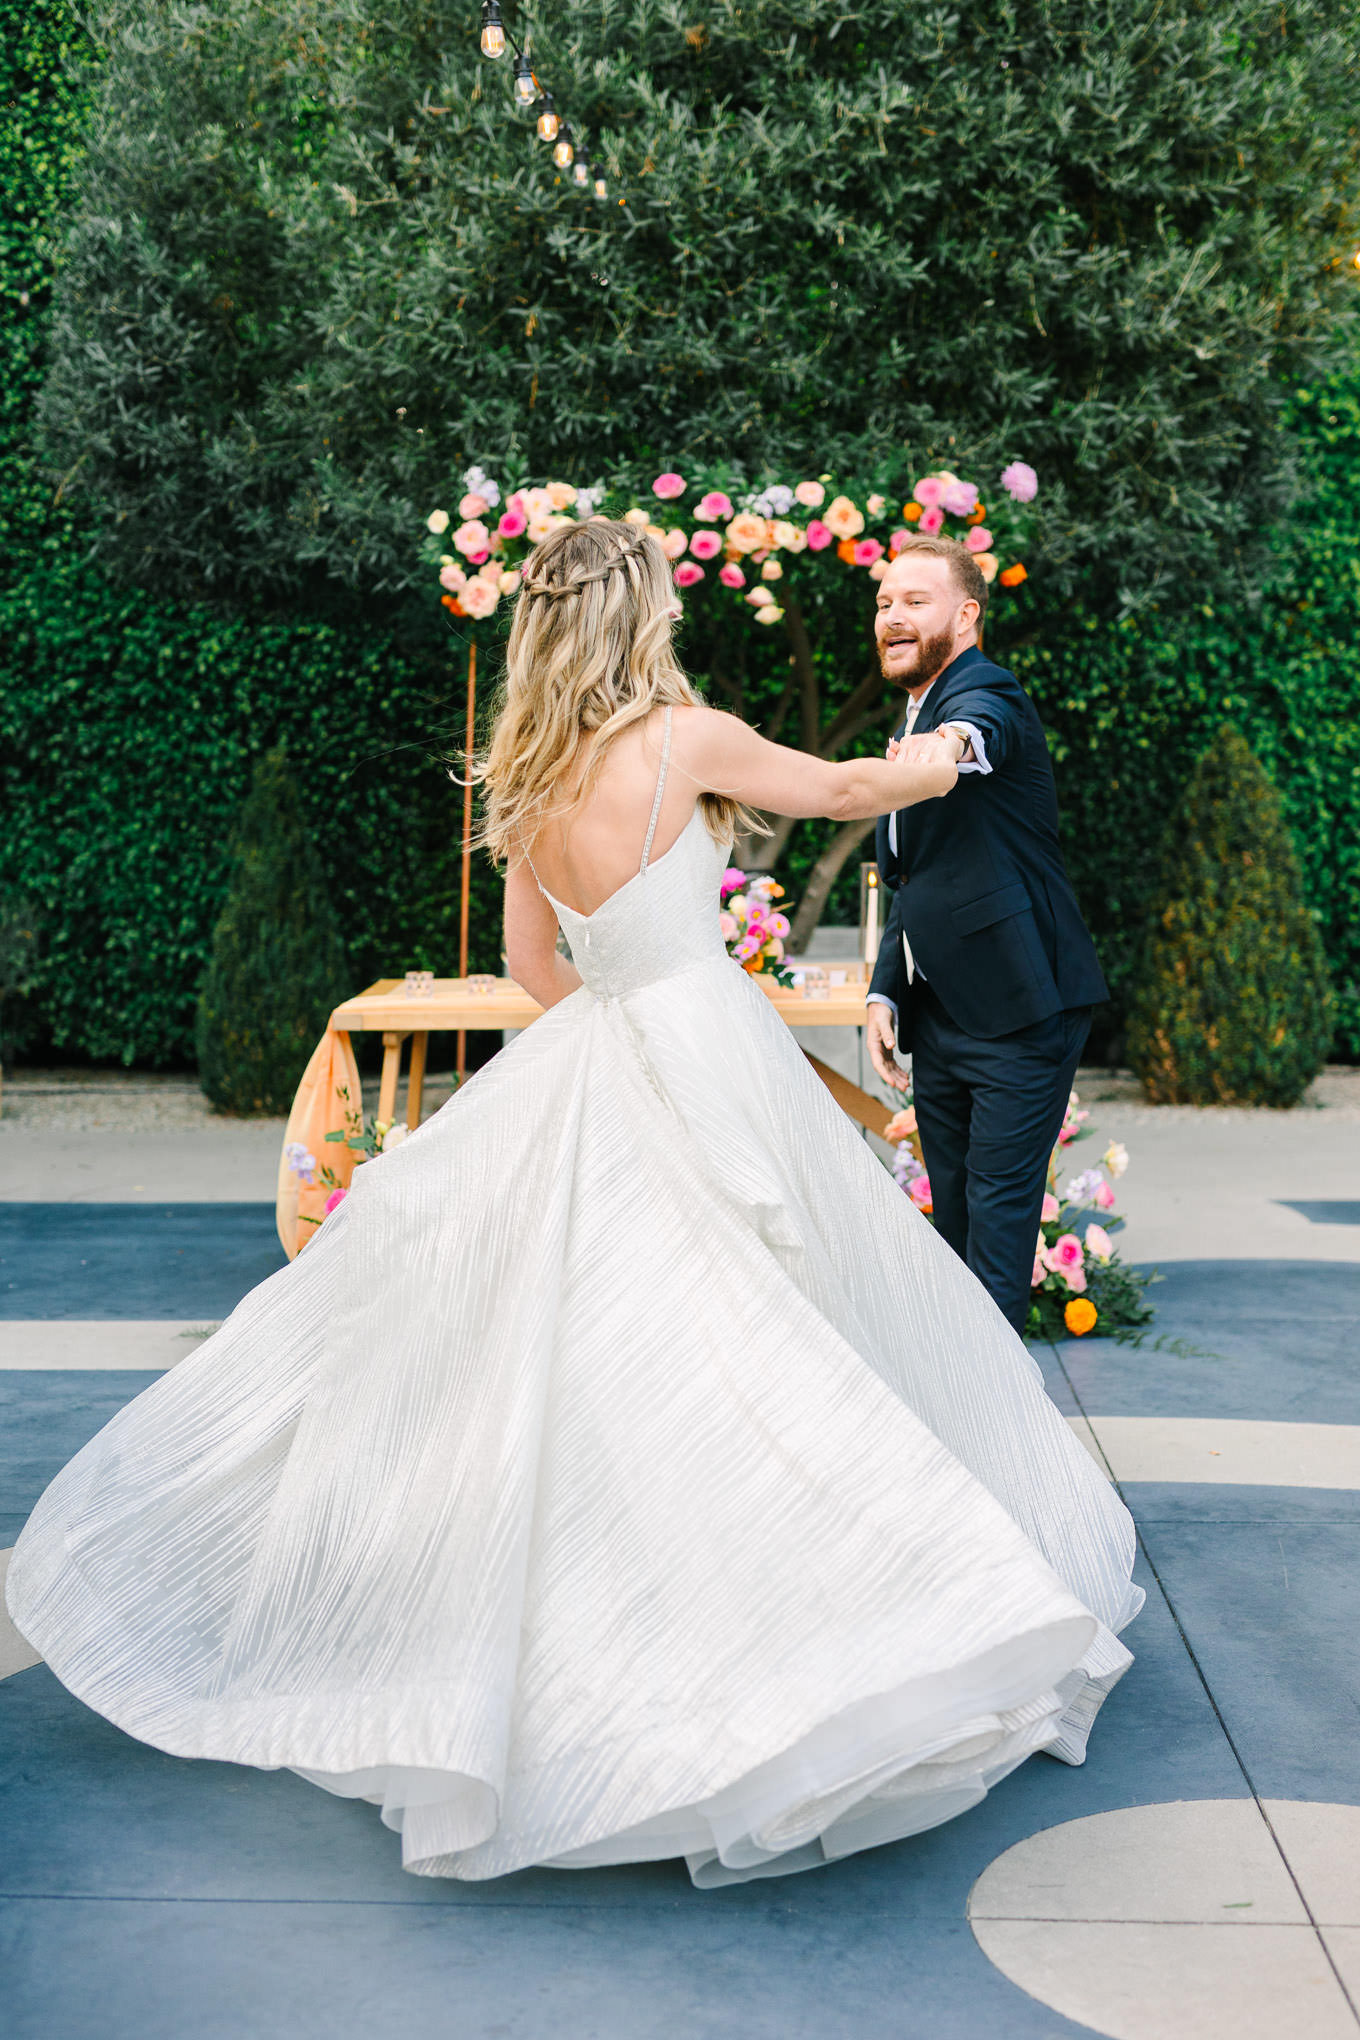 Fig House Los Angeles wedding | Wedding and elopement photography roundup | Los Angeles and Palm Springs  photographer | #losangeleswedding #palmspringswedding #elopementphotographer

Source: Mary Costa Photography | Los Angeles